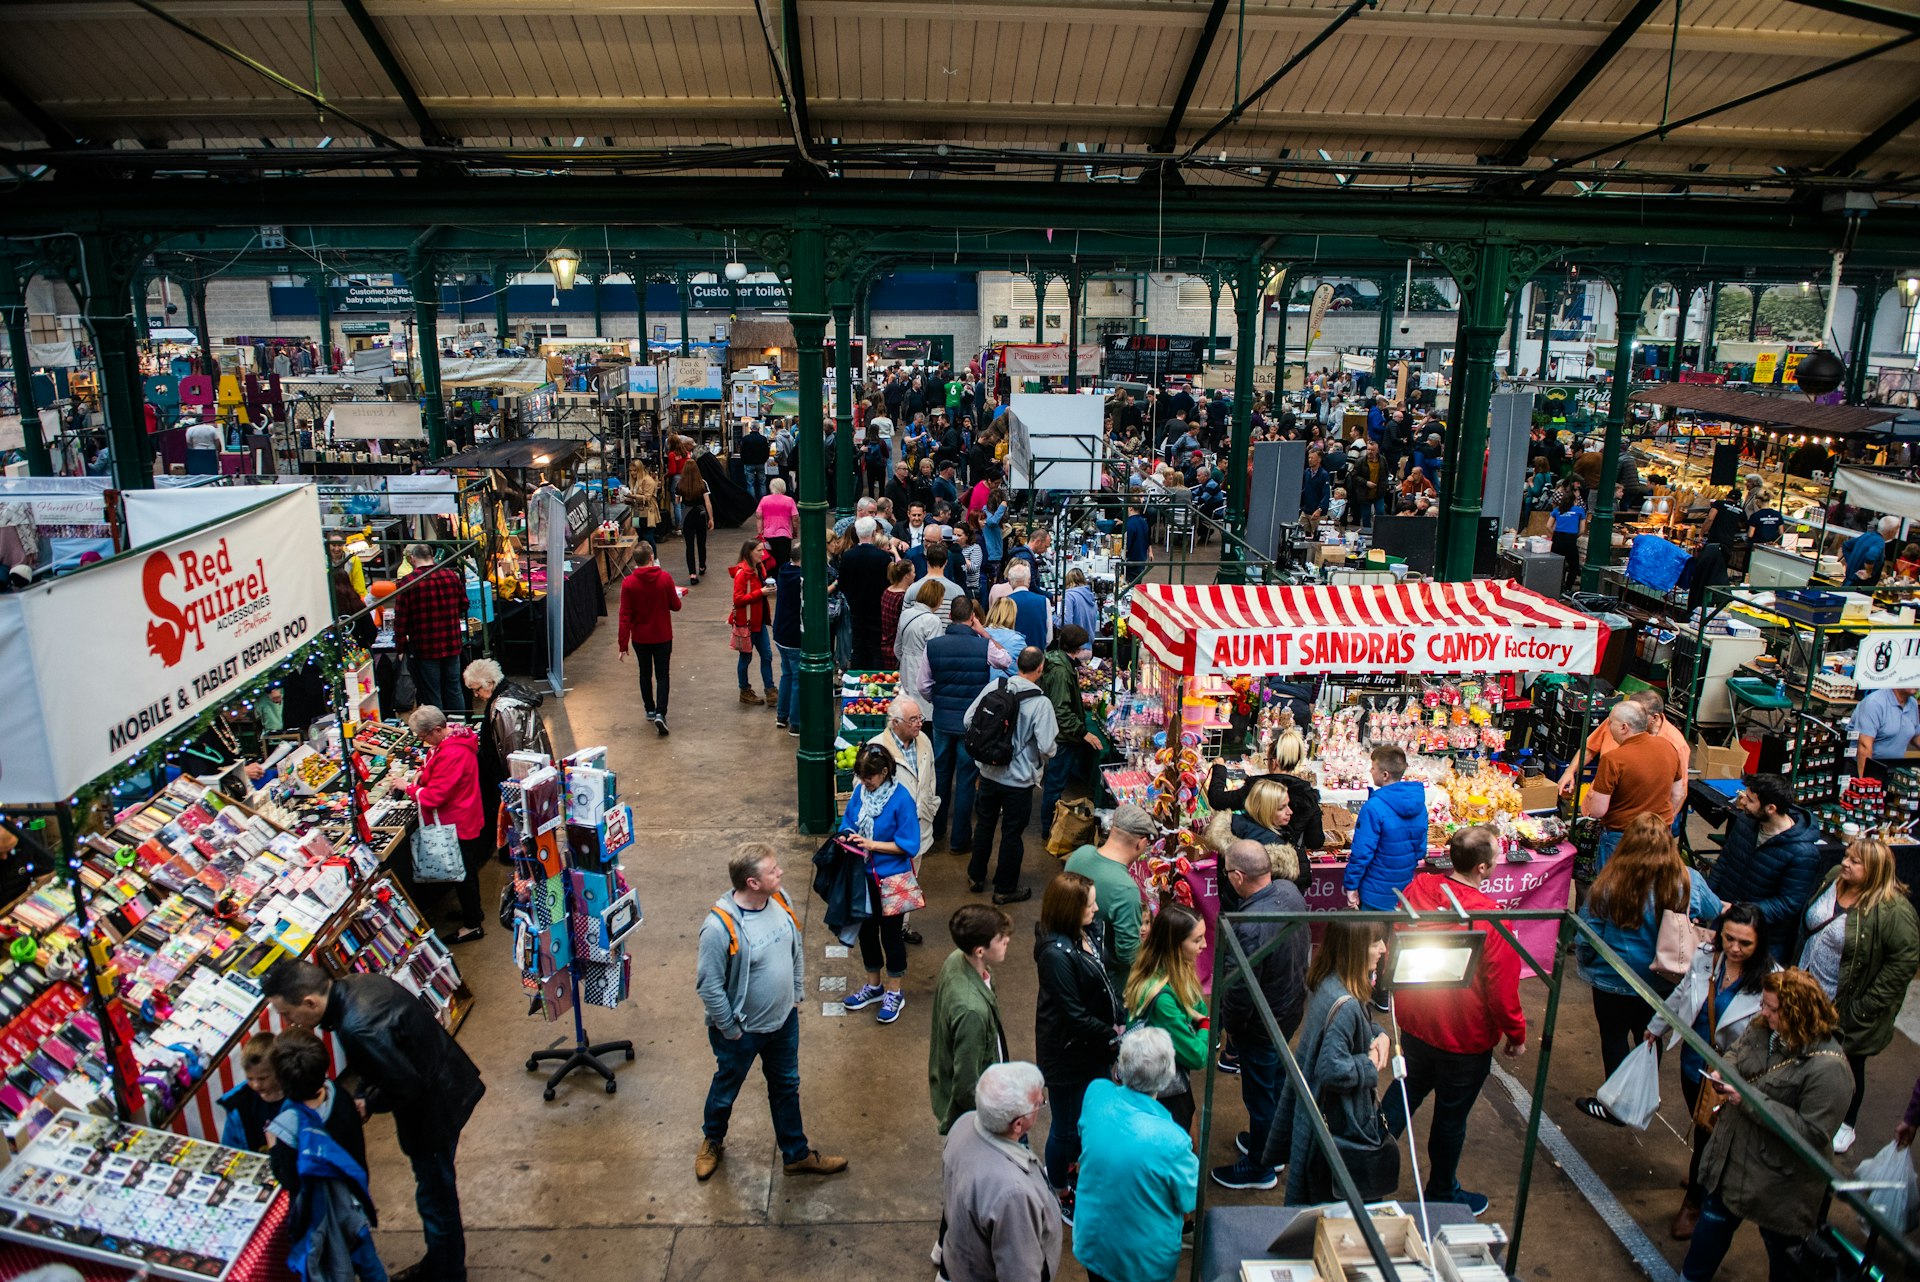 An overview of the many stalls selling wares under the Victorian facade of St George's Market in Belfast